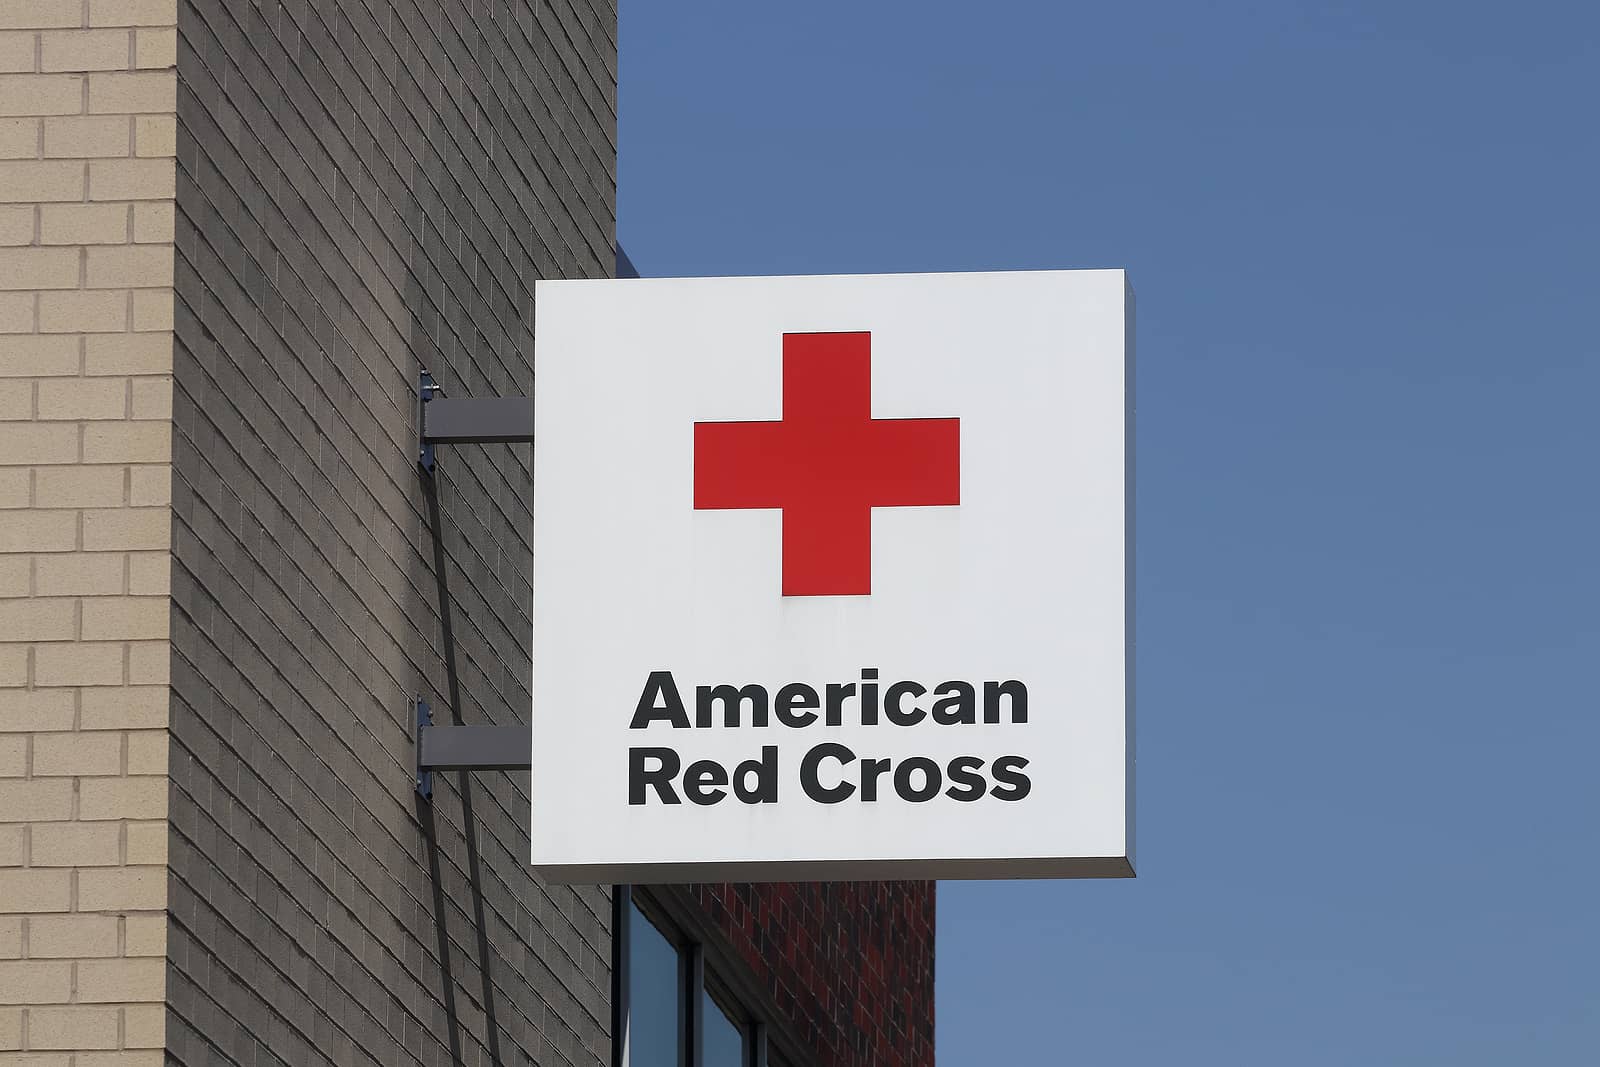 indianapolis-circa-october-2020-american-red-cross-sign-the